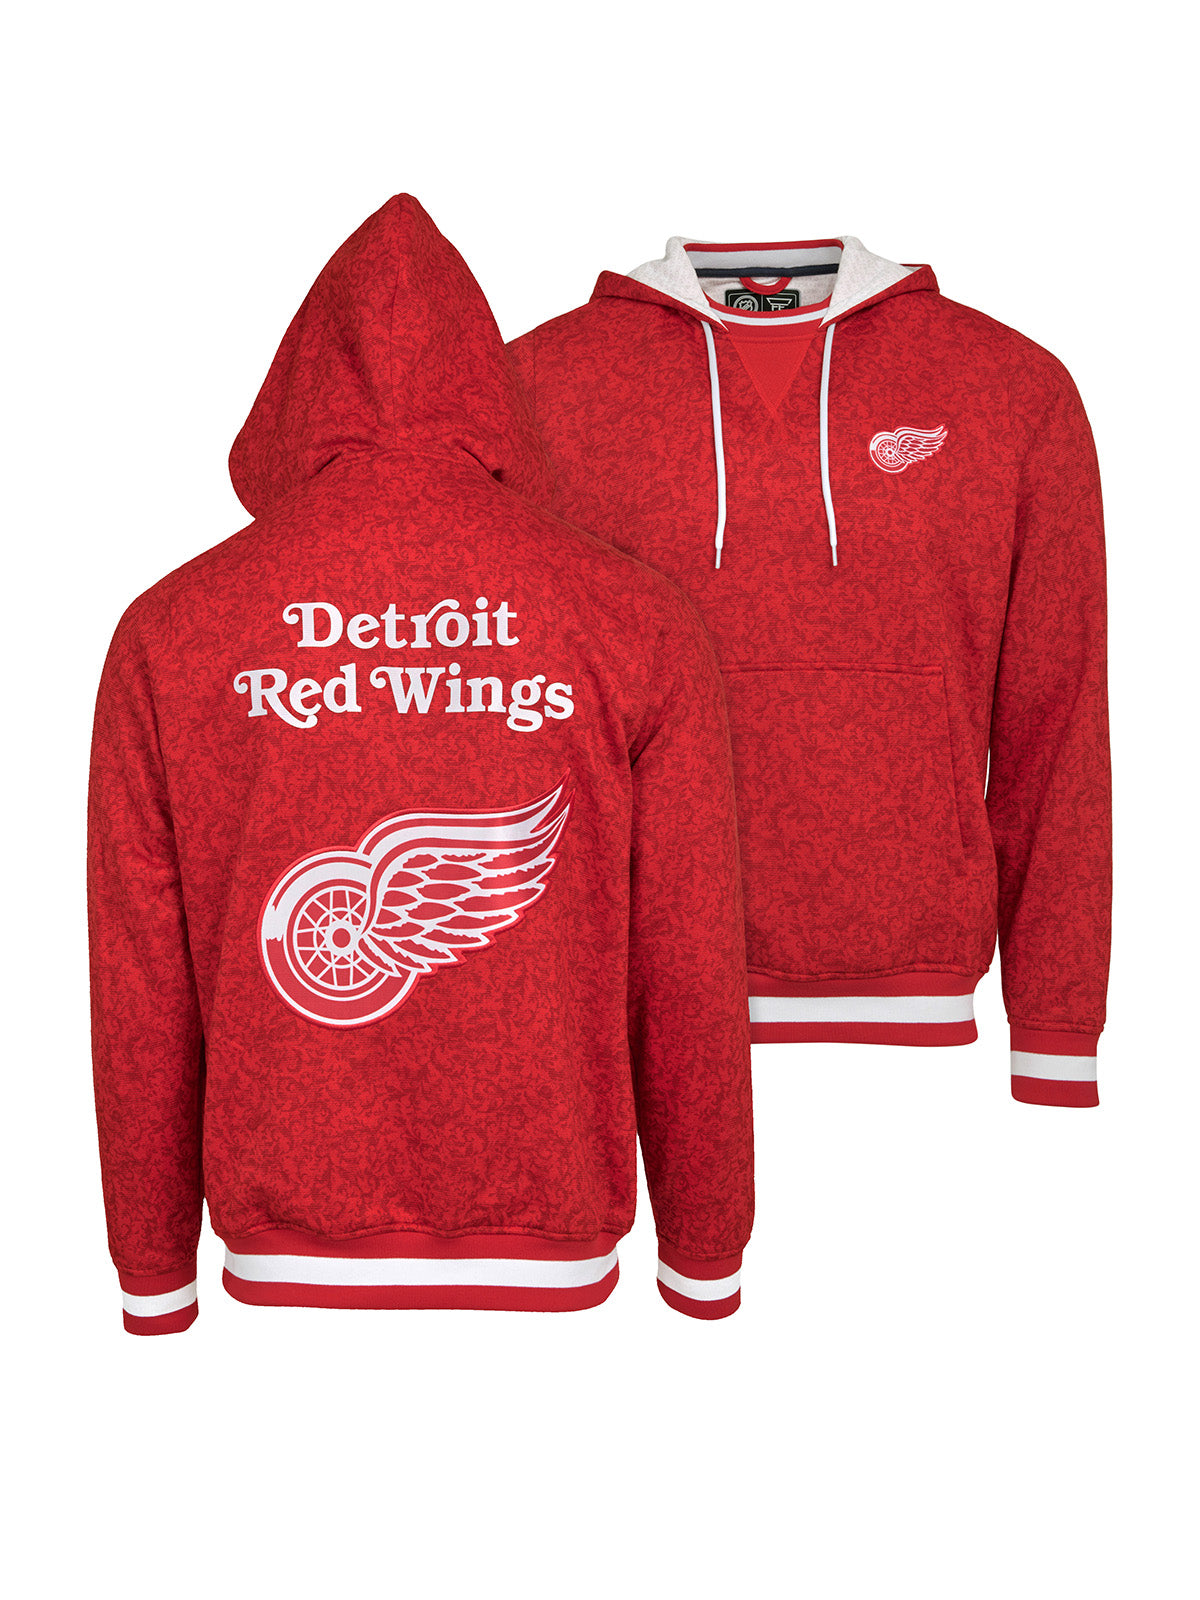 Detroit Red Wings Hoodie - Show your team spirit, with the iconic team logo patch on the front and back, and proudly display your Detroit Red Wings support in their team colors with this NHL hockey hoodie.